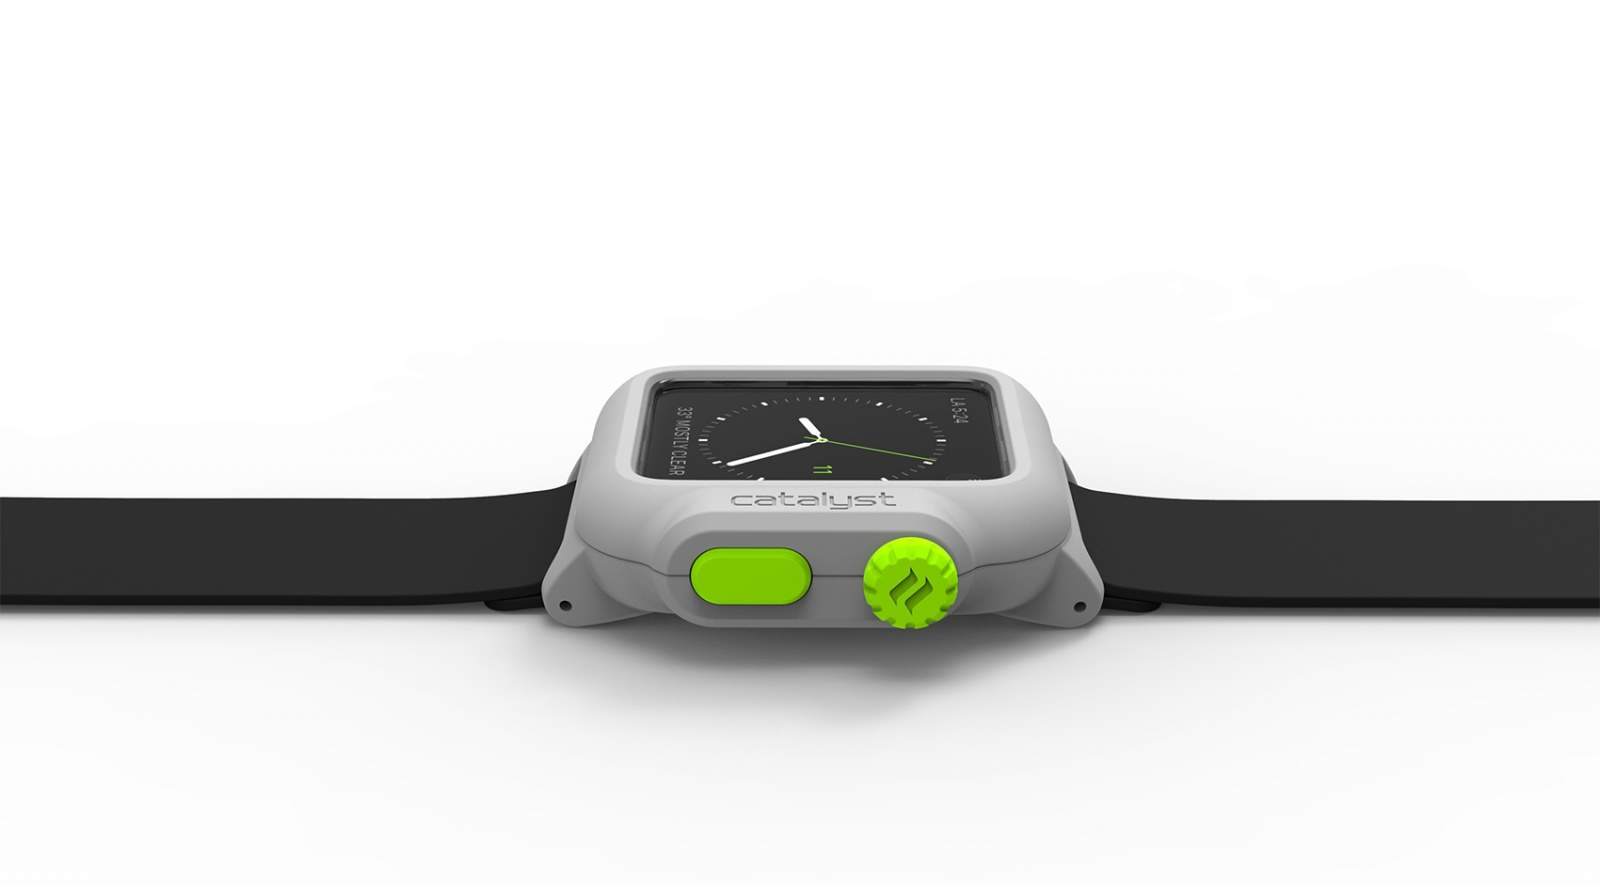 The new waterproof case for the Apple Watch by Catalyst.